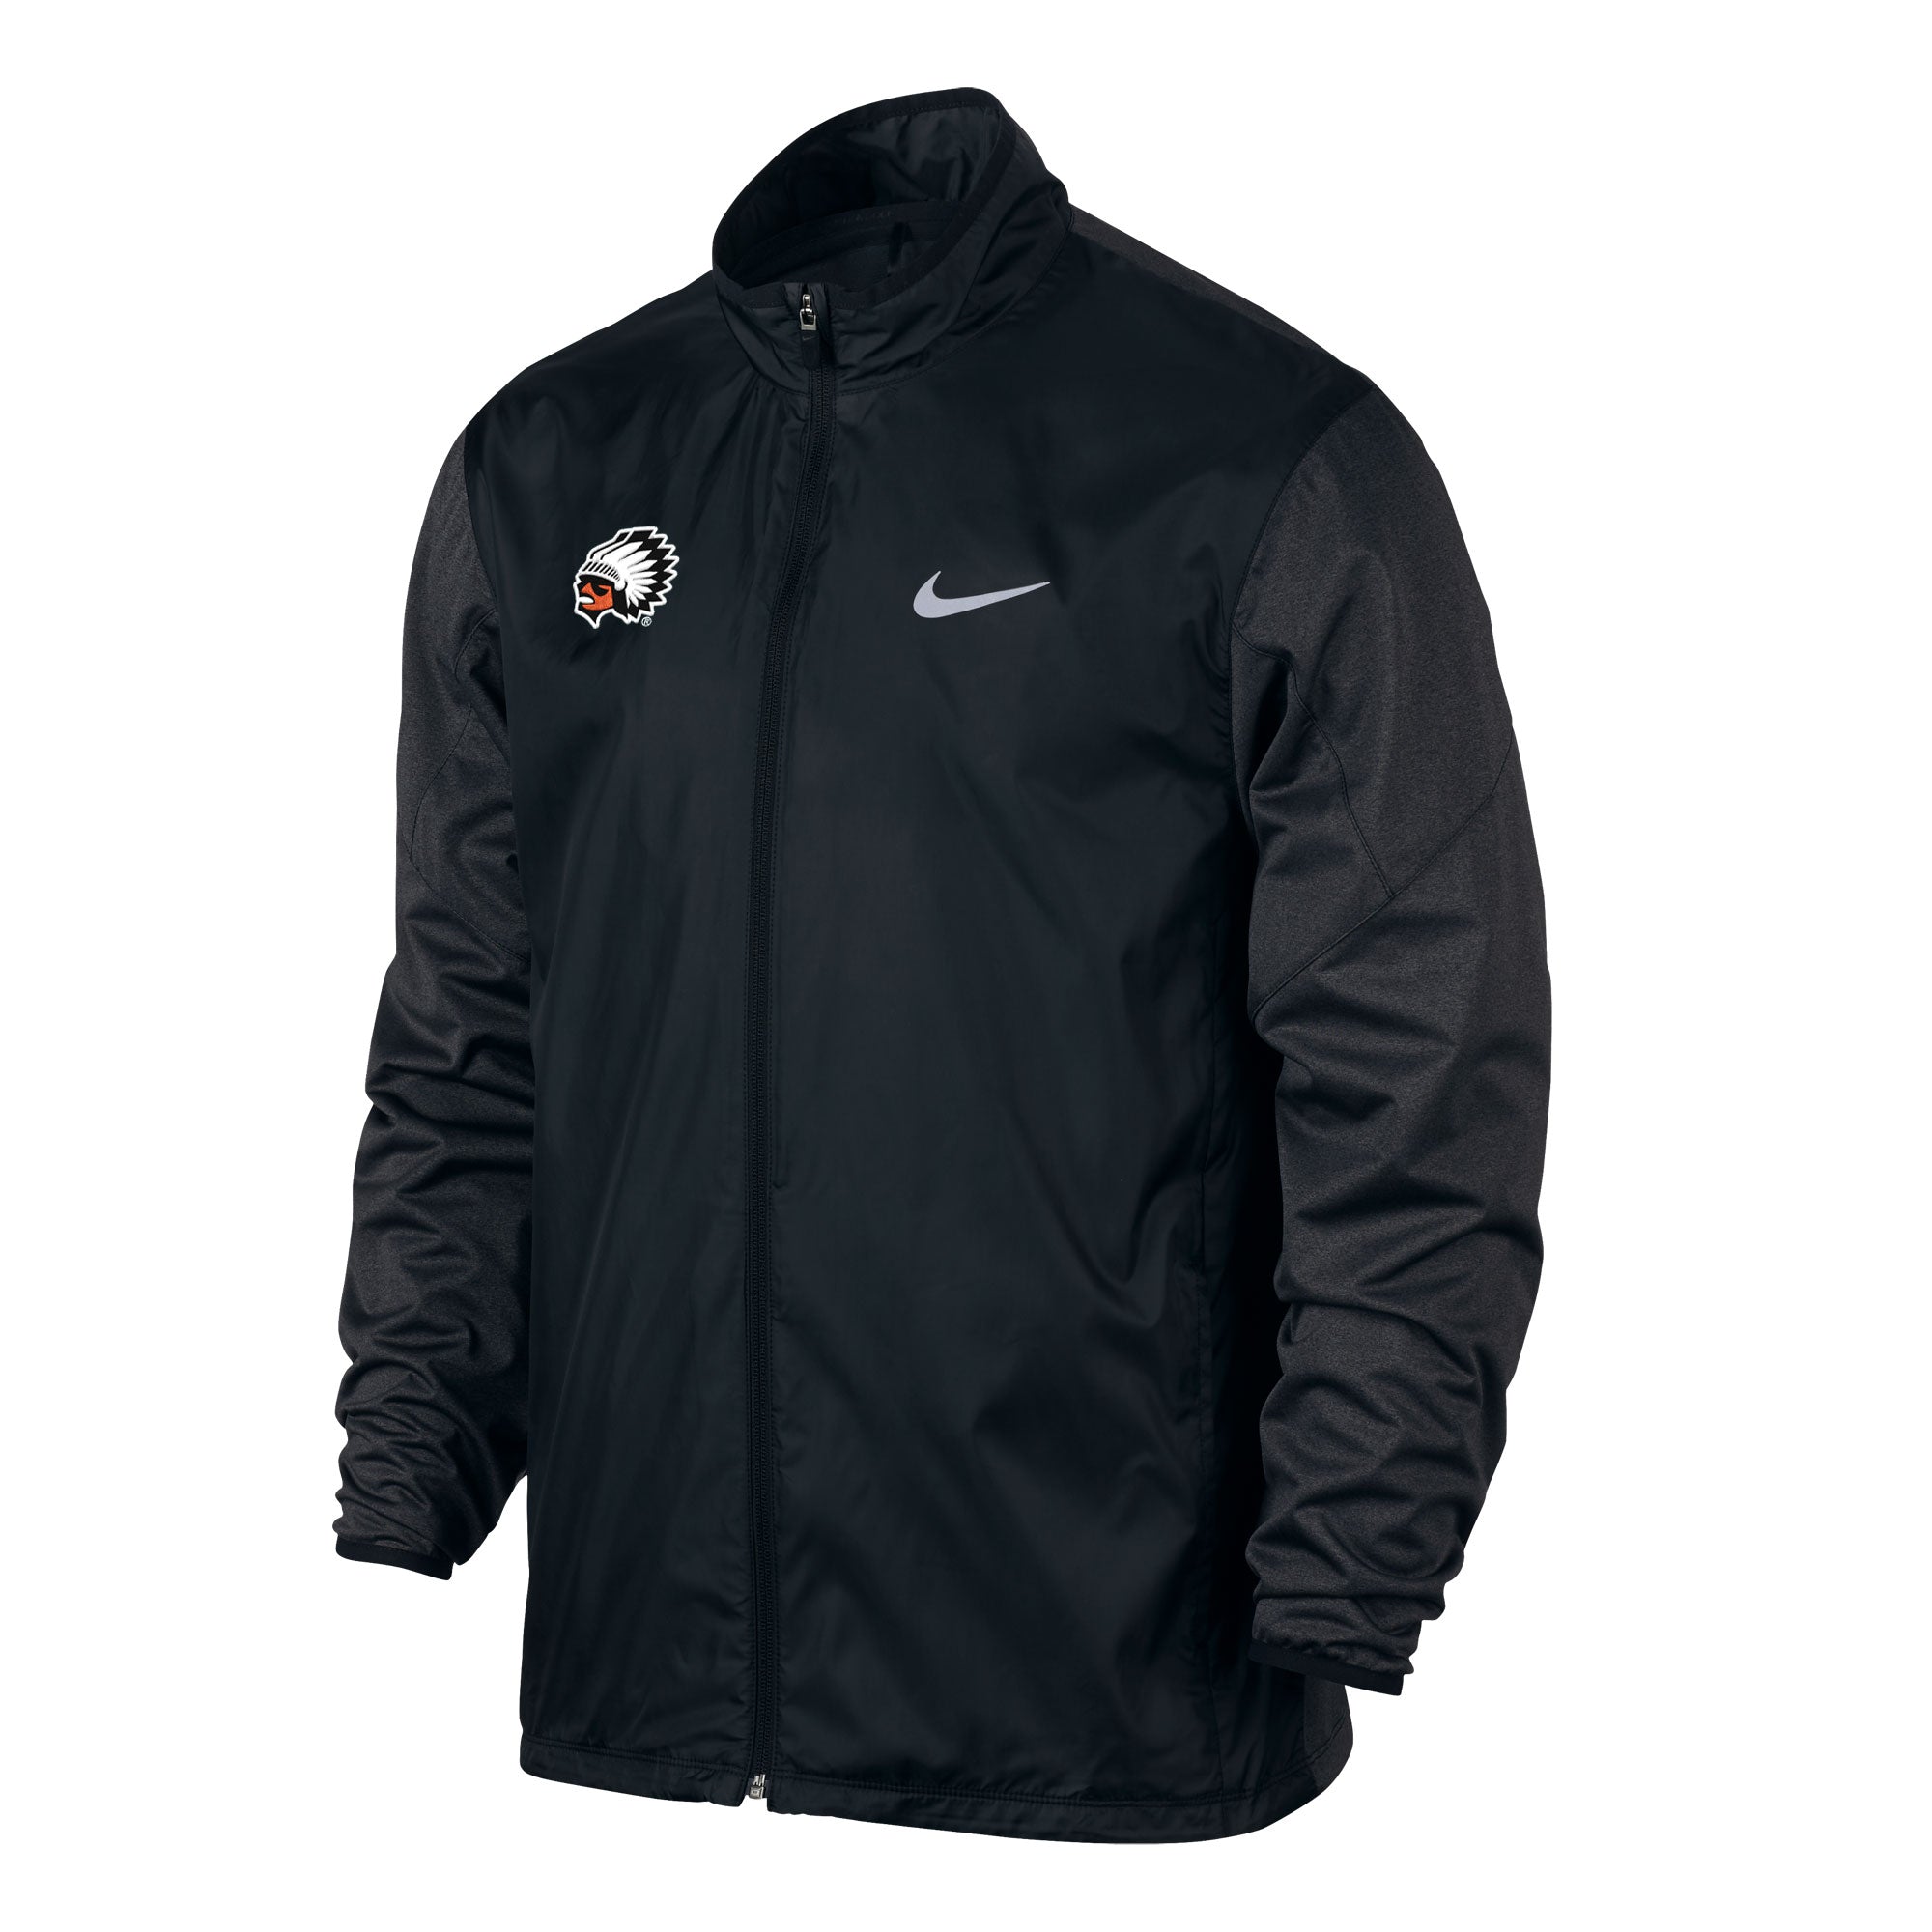 Nike Golf Shield Zip Jacket – Brother Rice Bookstore